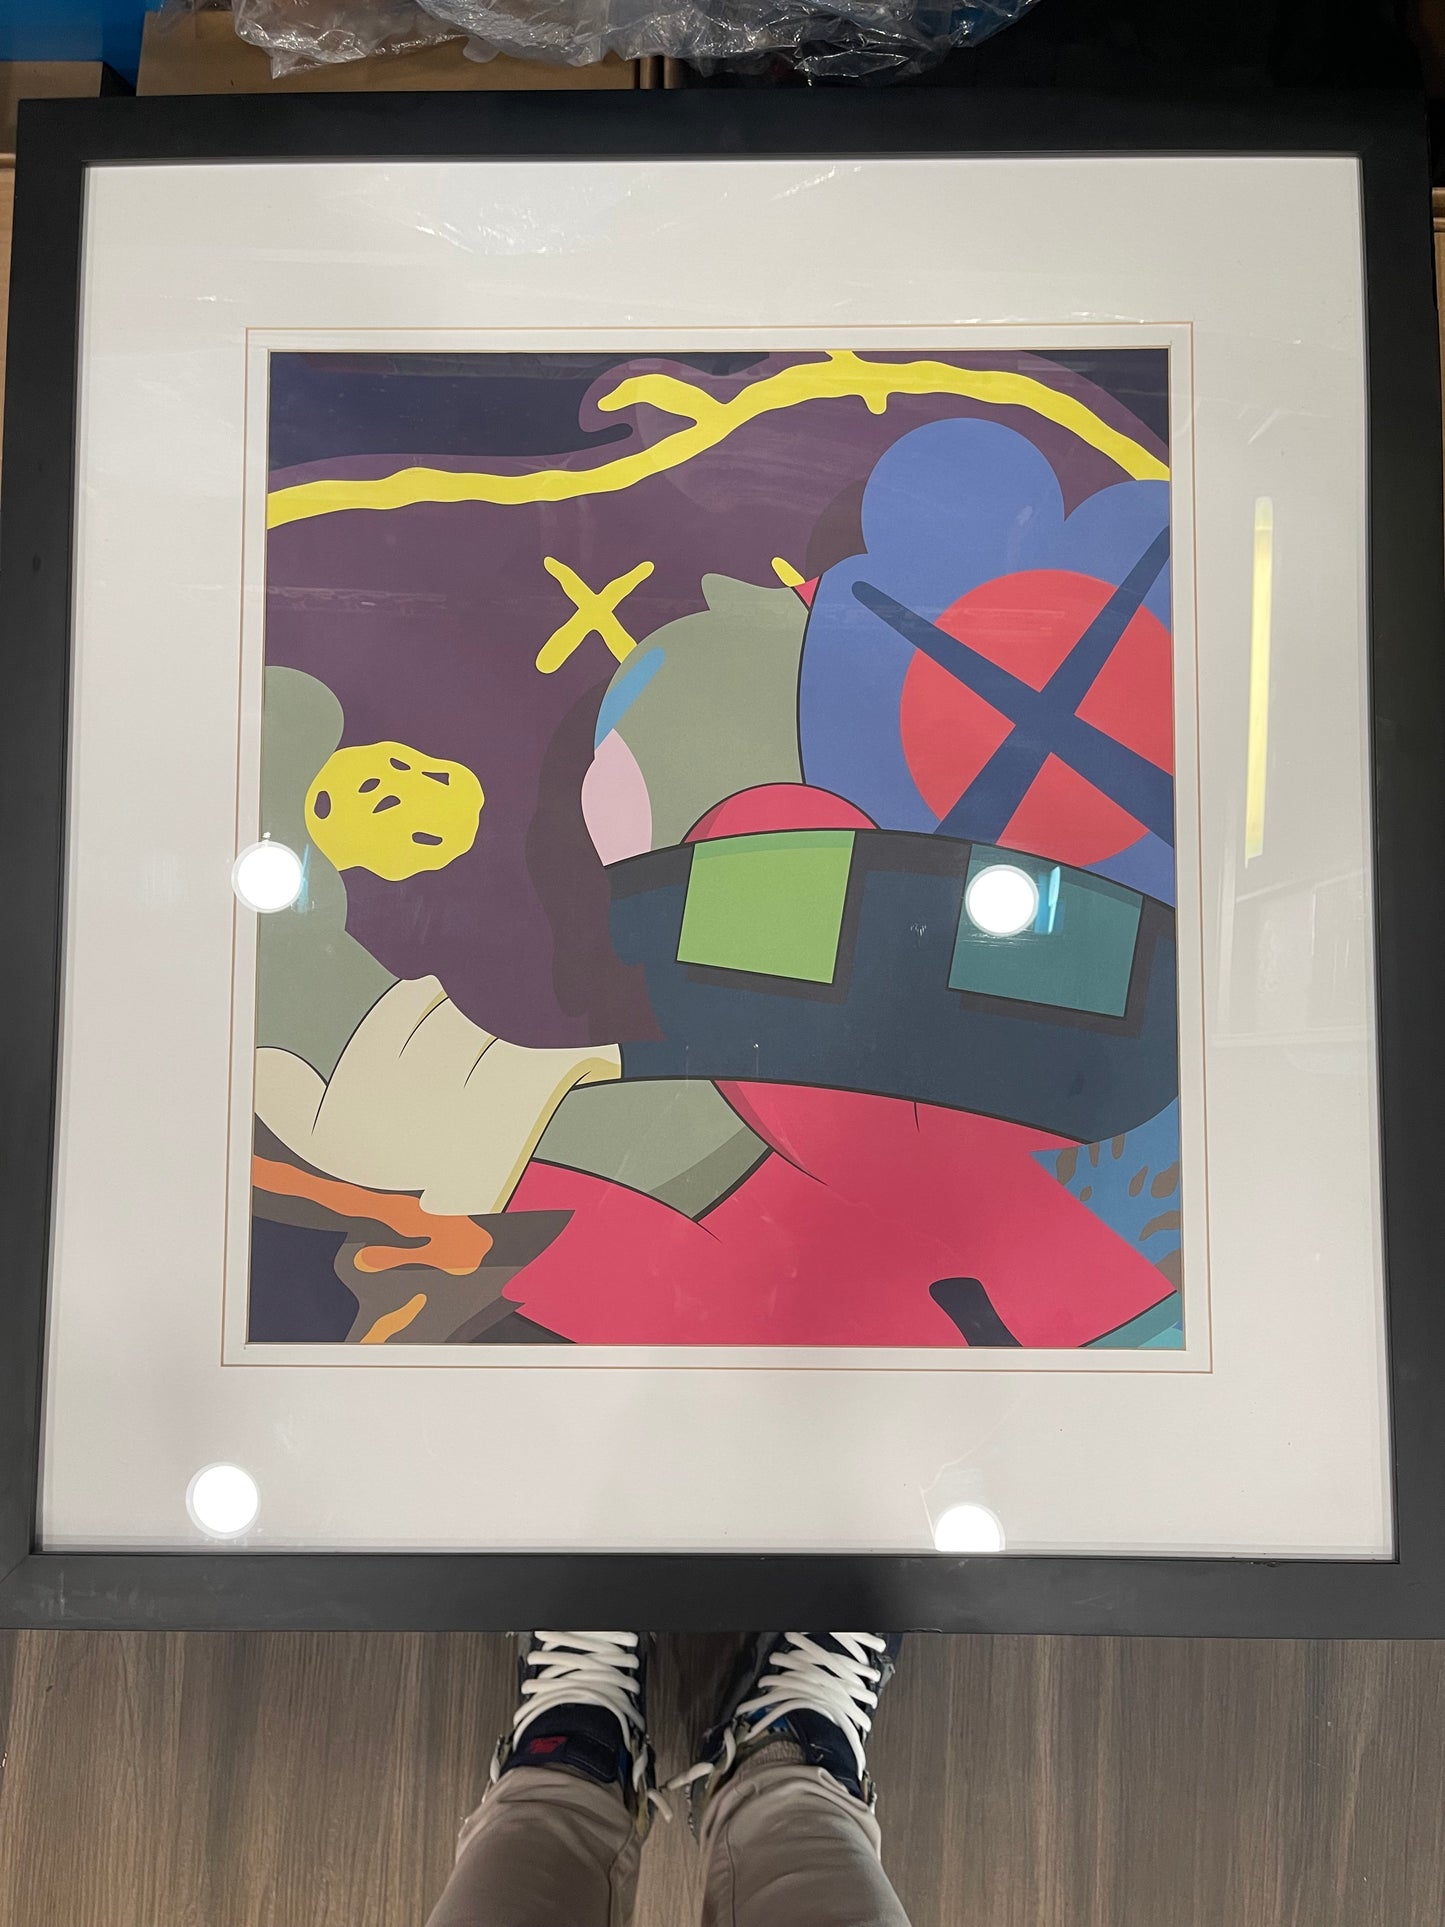 Hypebeast Magazine Issue #16 " The Projection" PRINT with artwork by KAWS (October 2016)